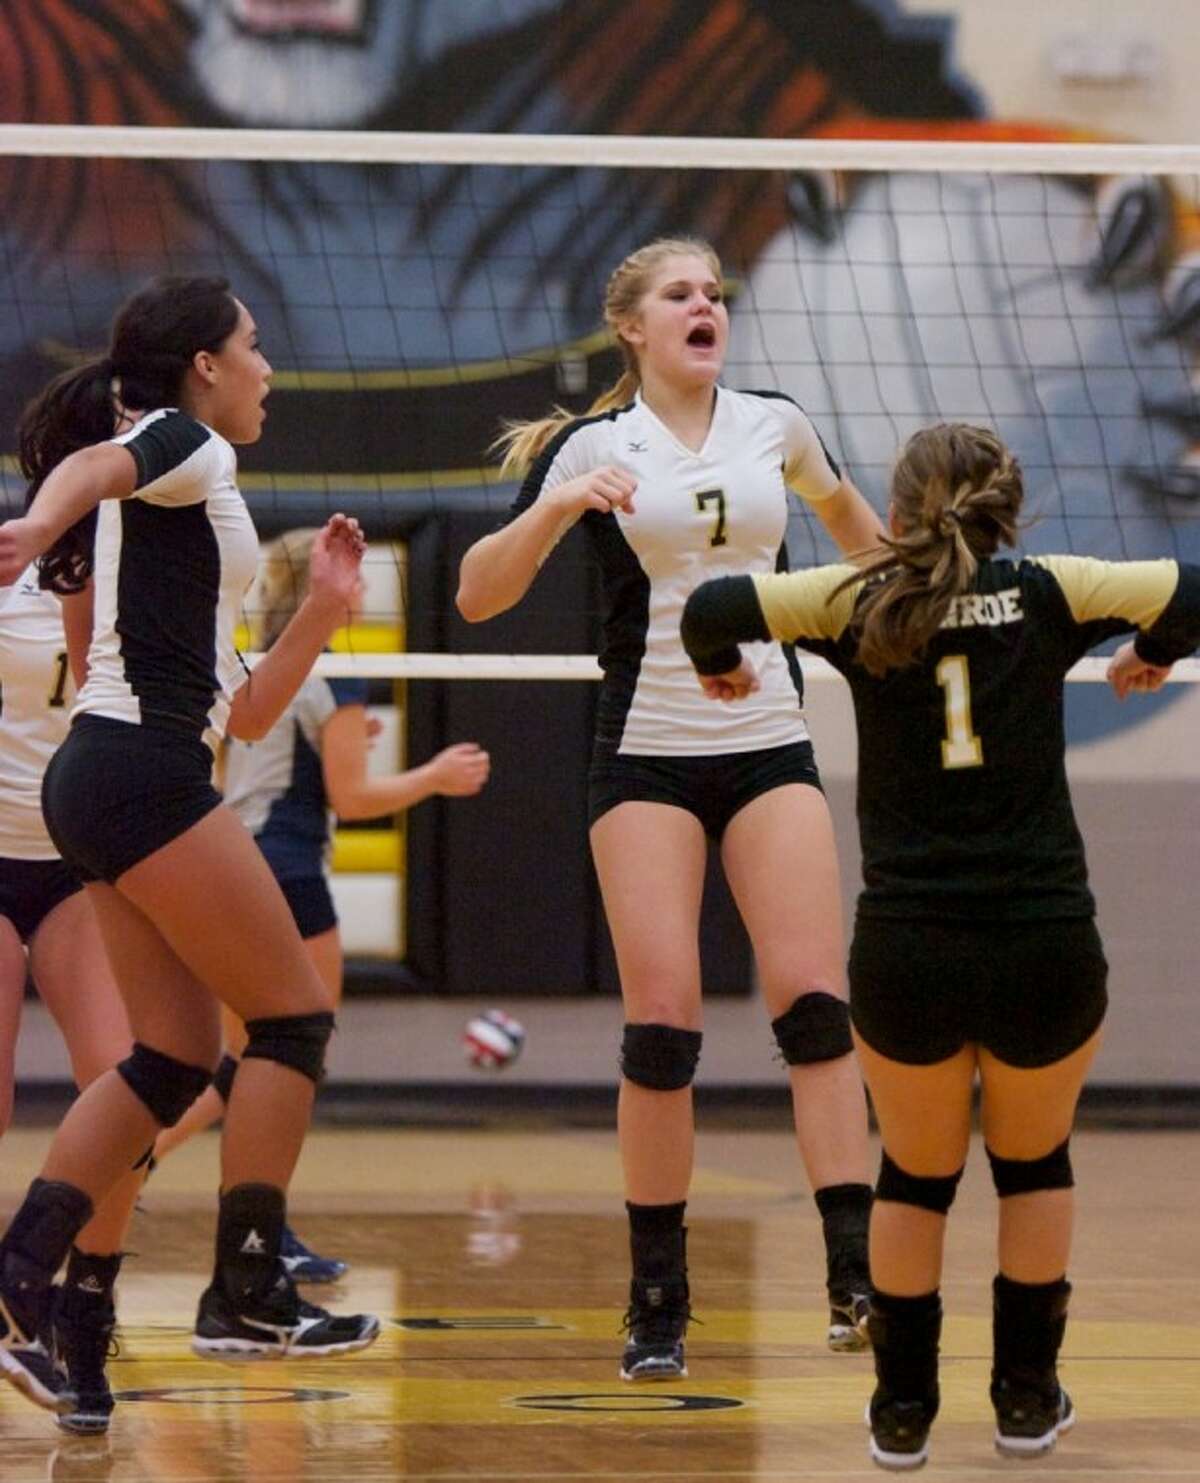 Conroe’s Jane Shute celebrates a point with teammates during Friday night’s game against College Park.